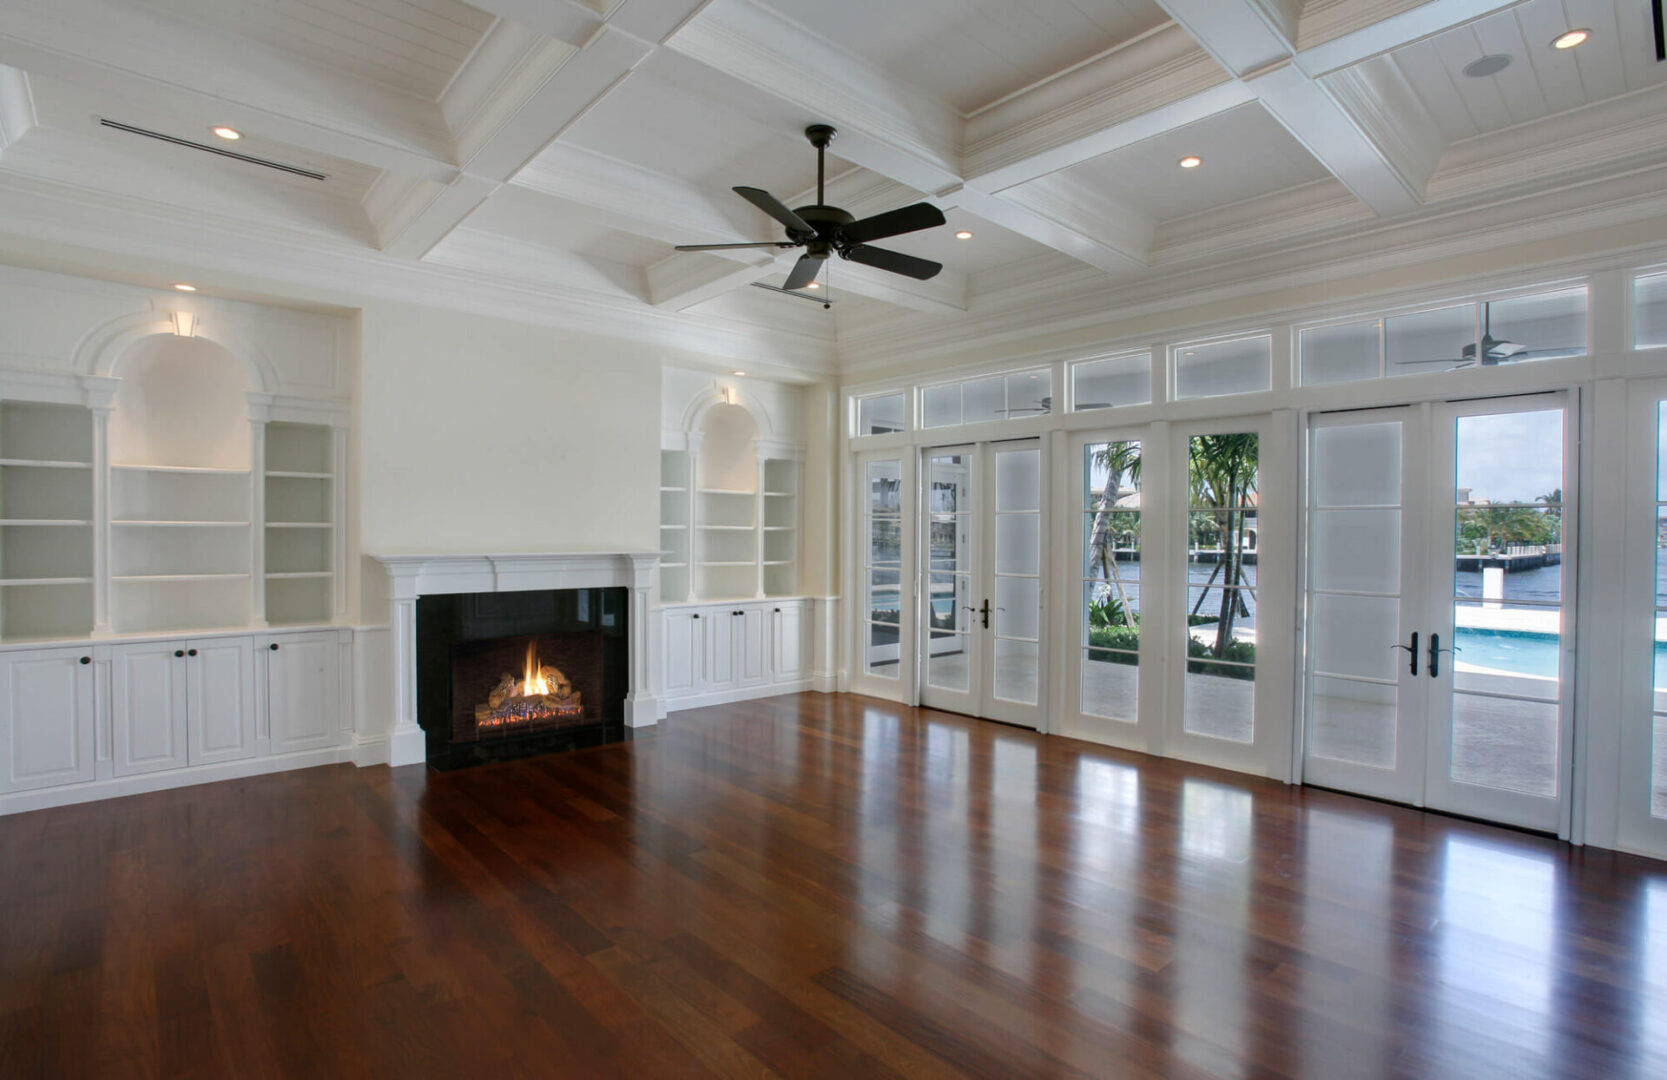 A living room with hard wood floors and white walls.